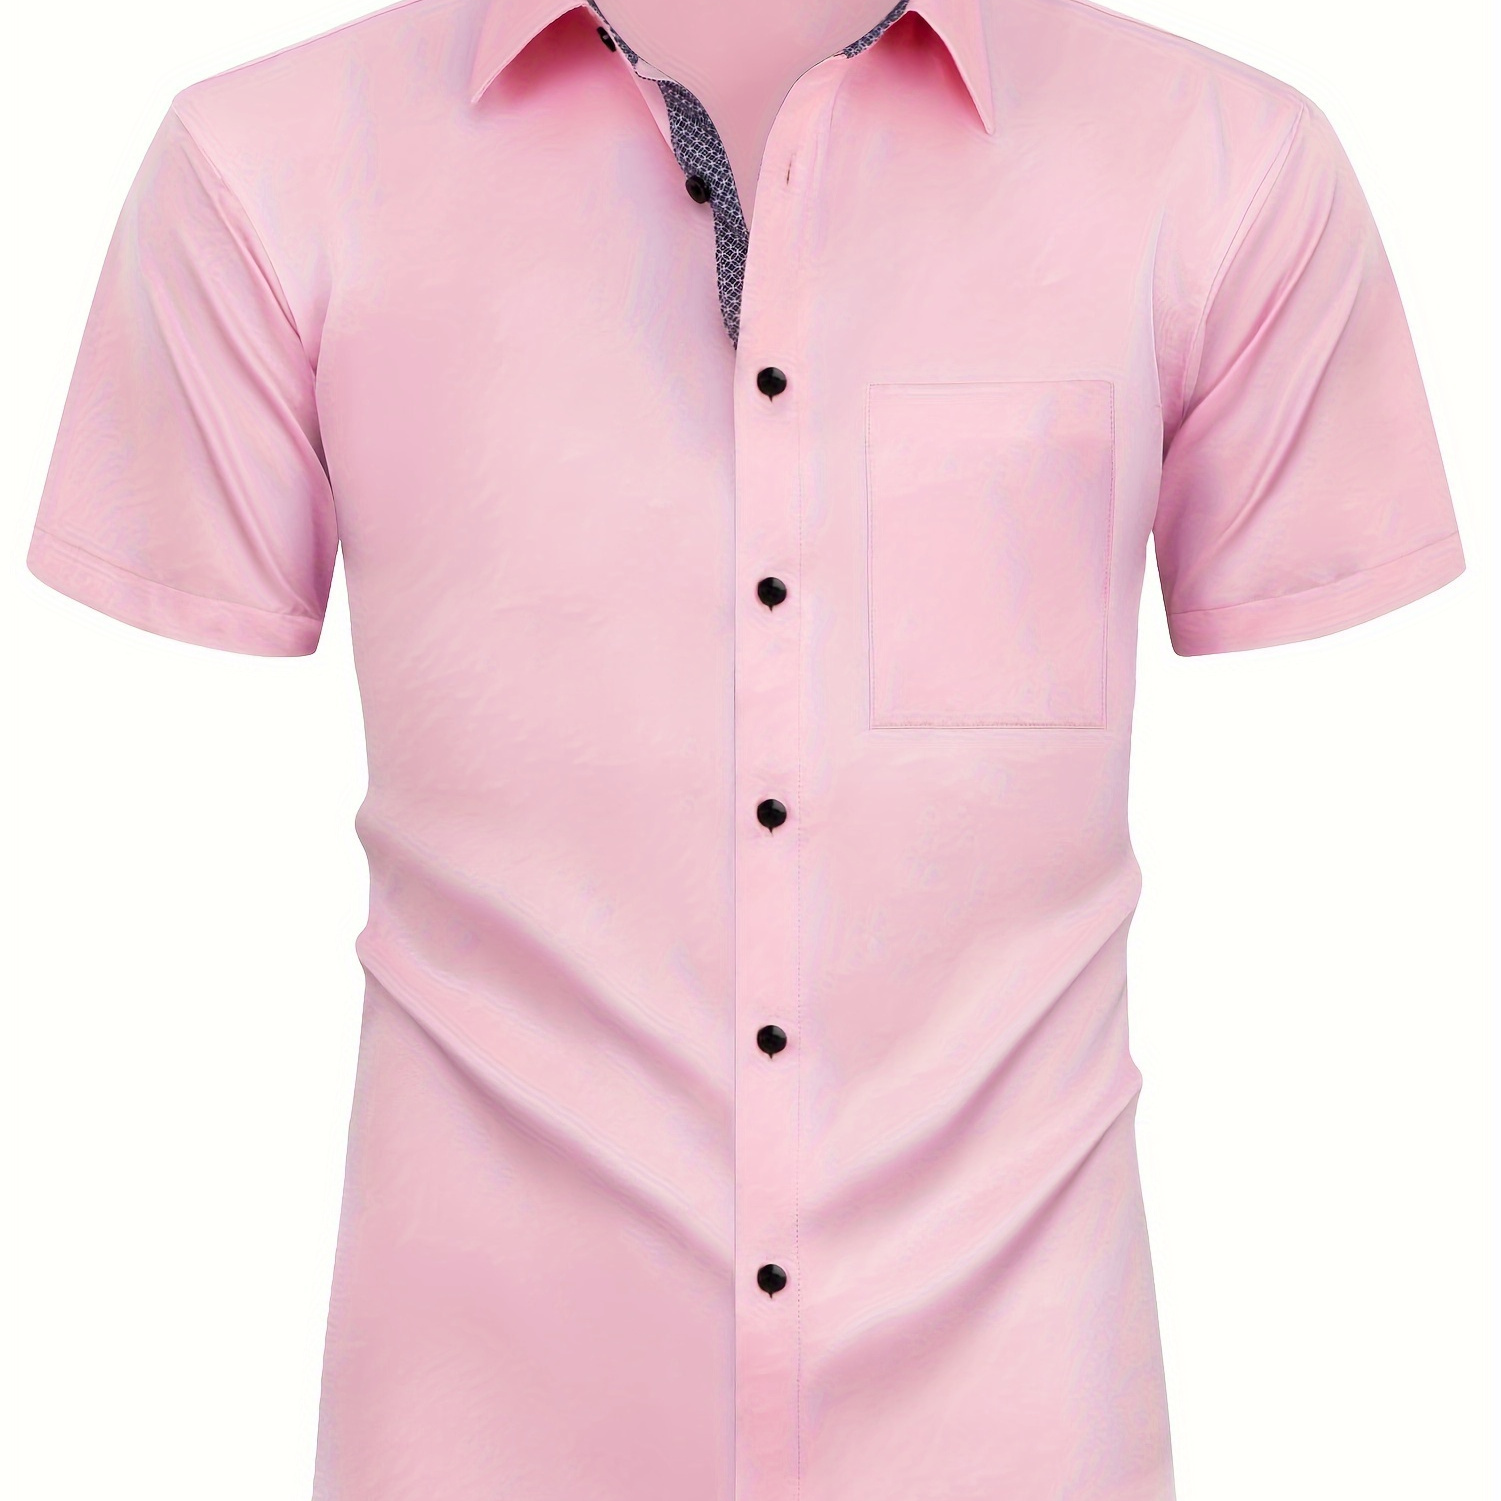 

Men's Solid Color Short Sleeve And Button Up Lapel Shirt, Contrast Color Graphic Print Neckline And Placket, Classic And Chic Design, Versatile And Casual Shirt For Business And Outdoors Wear